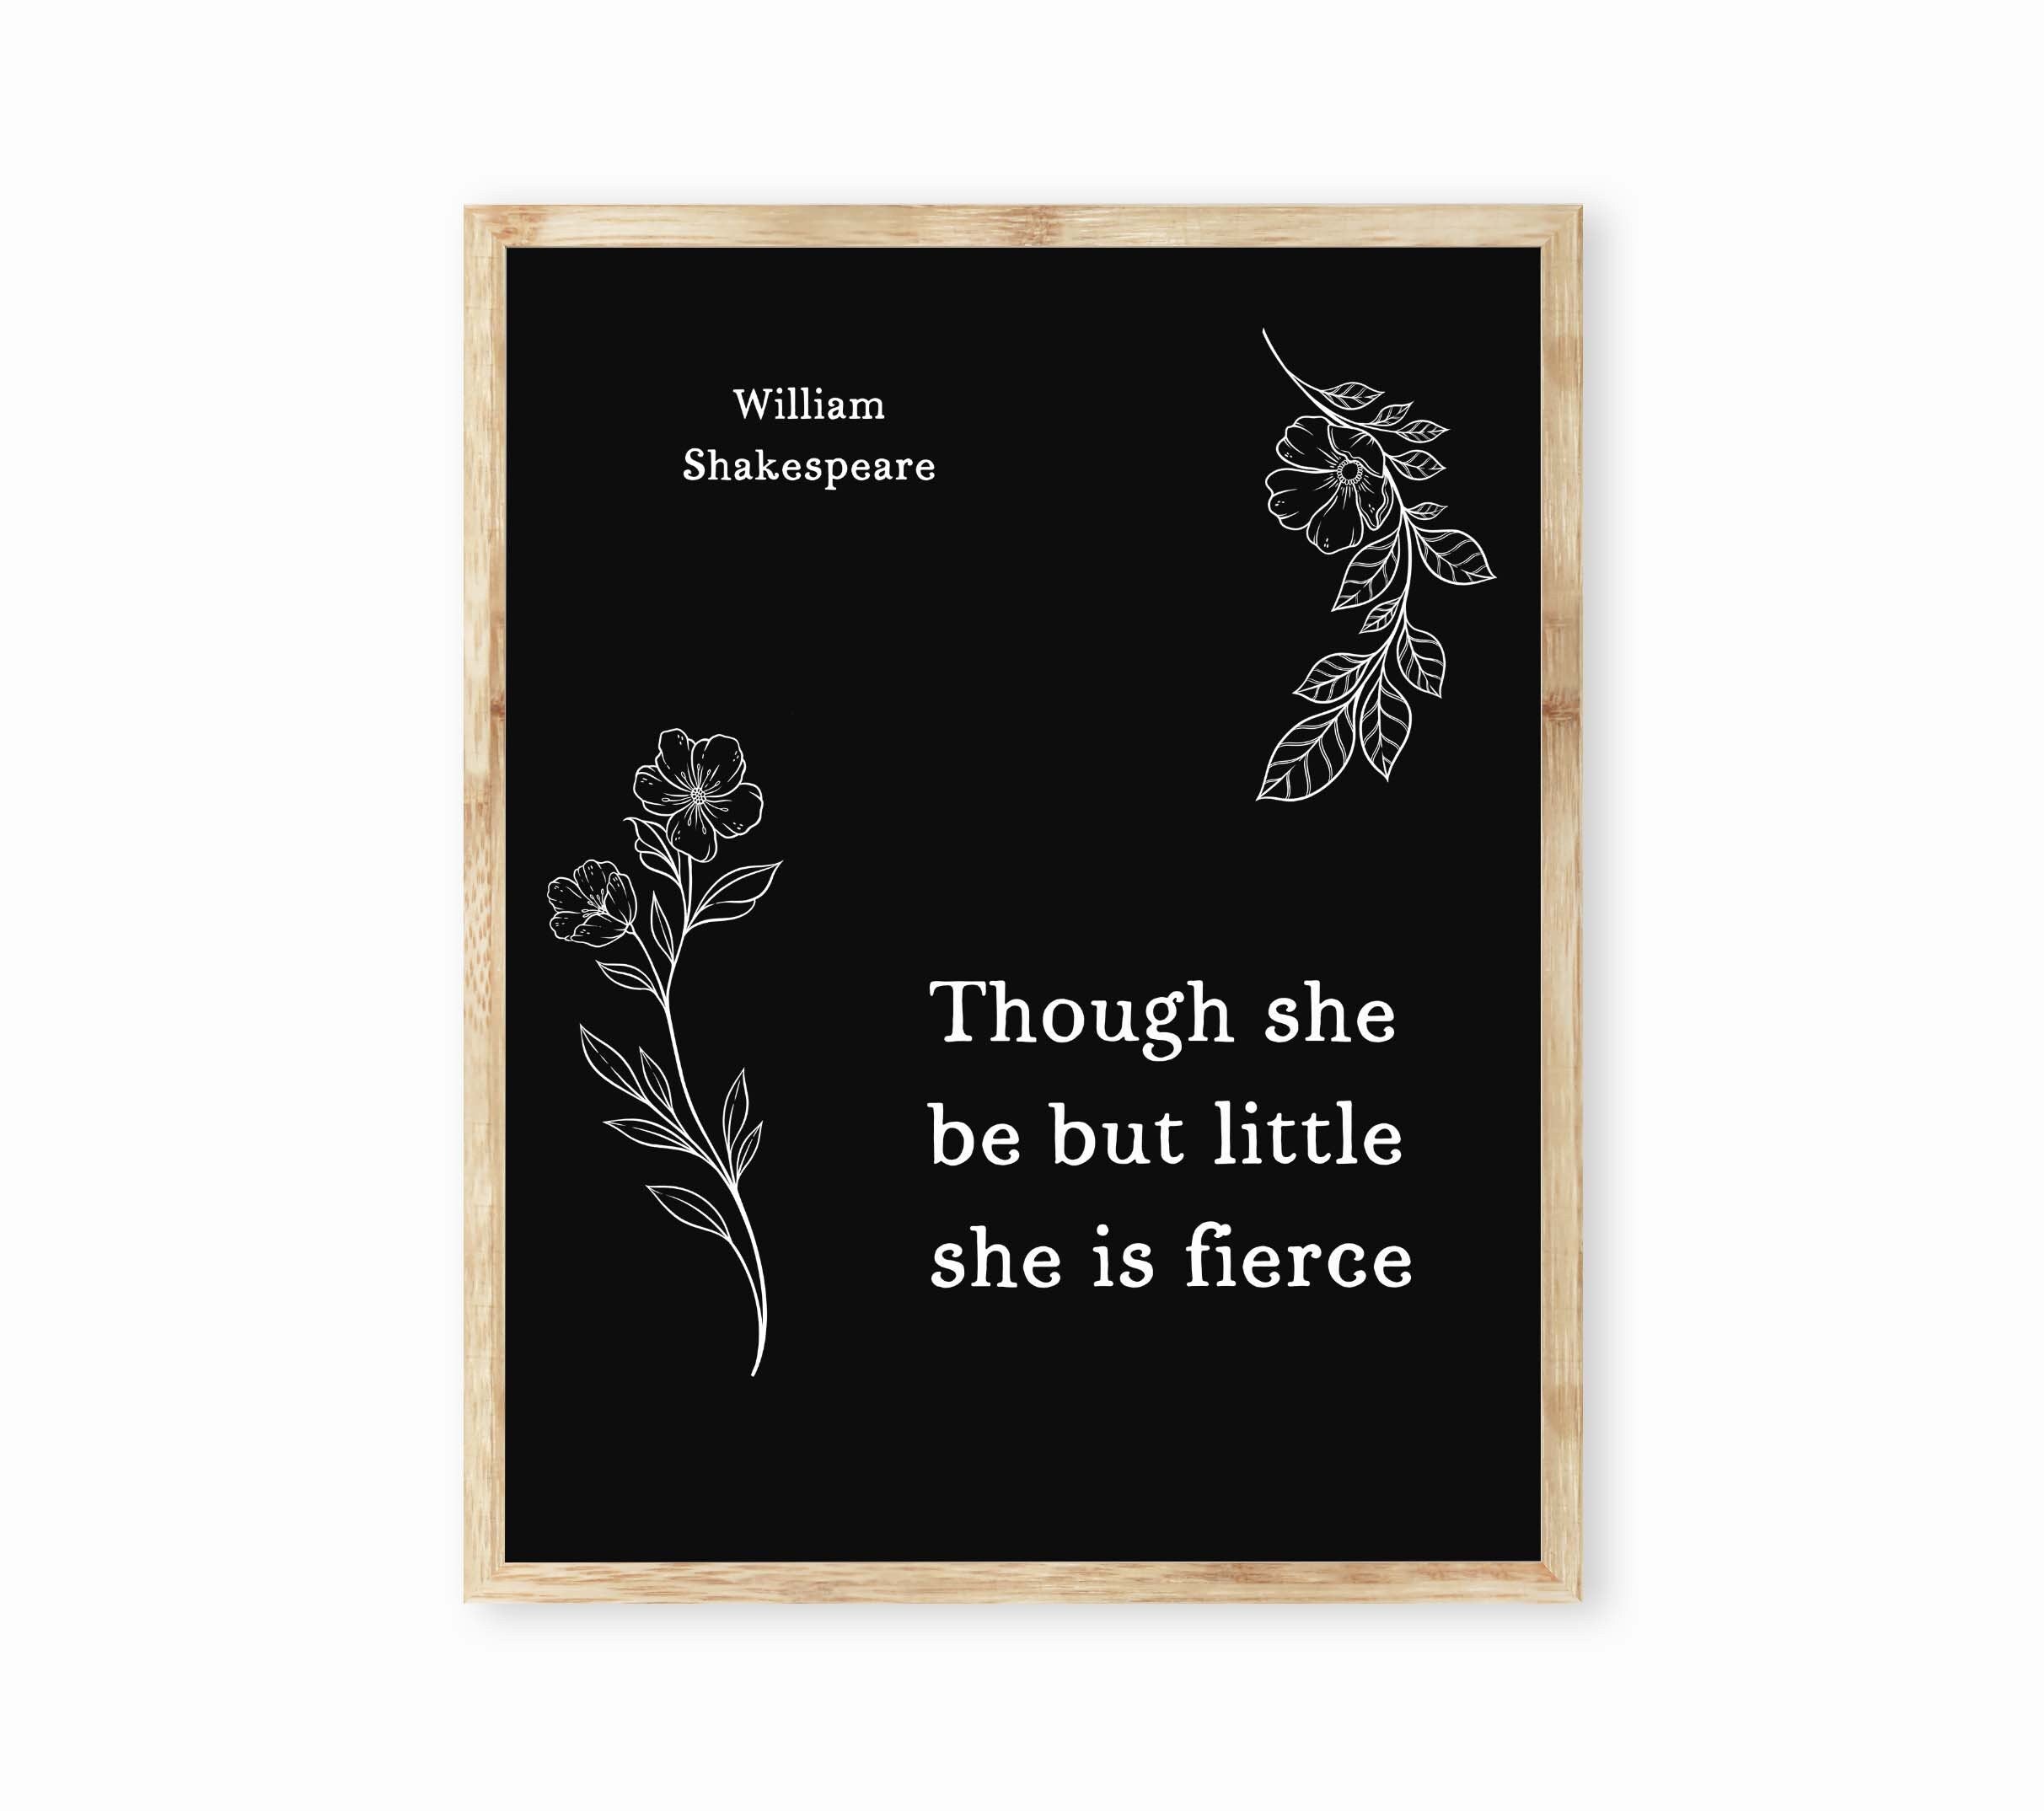 Though She Be But Little She Is Fierce Wall Art Prints, William Shakespeare Quote Black & White Art Unframed